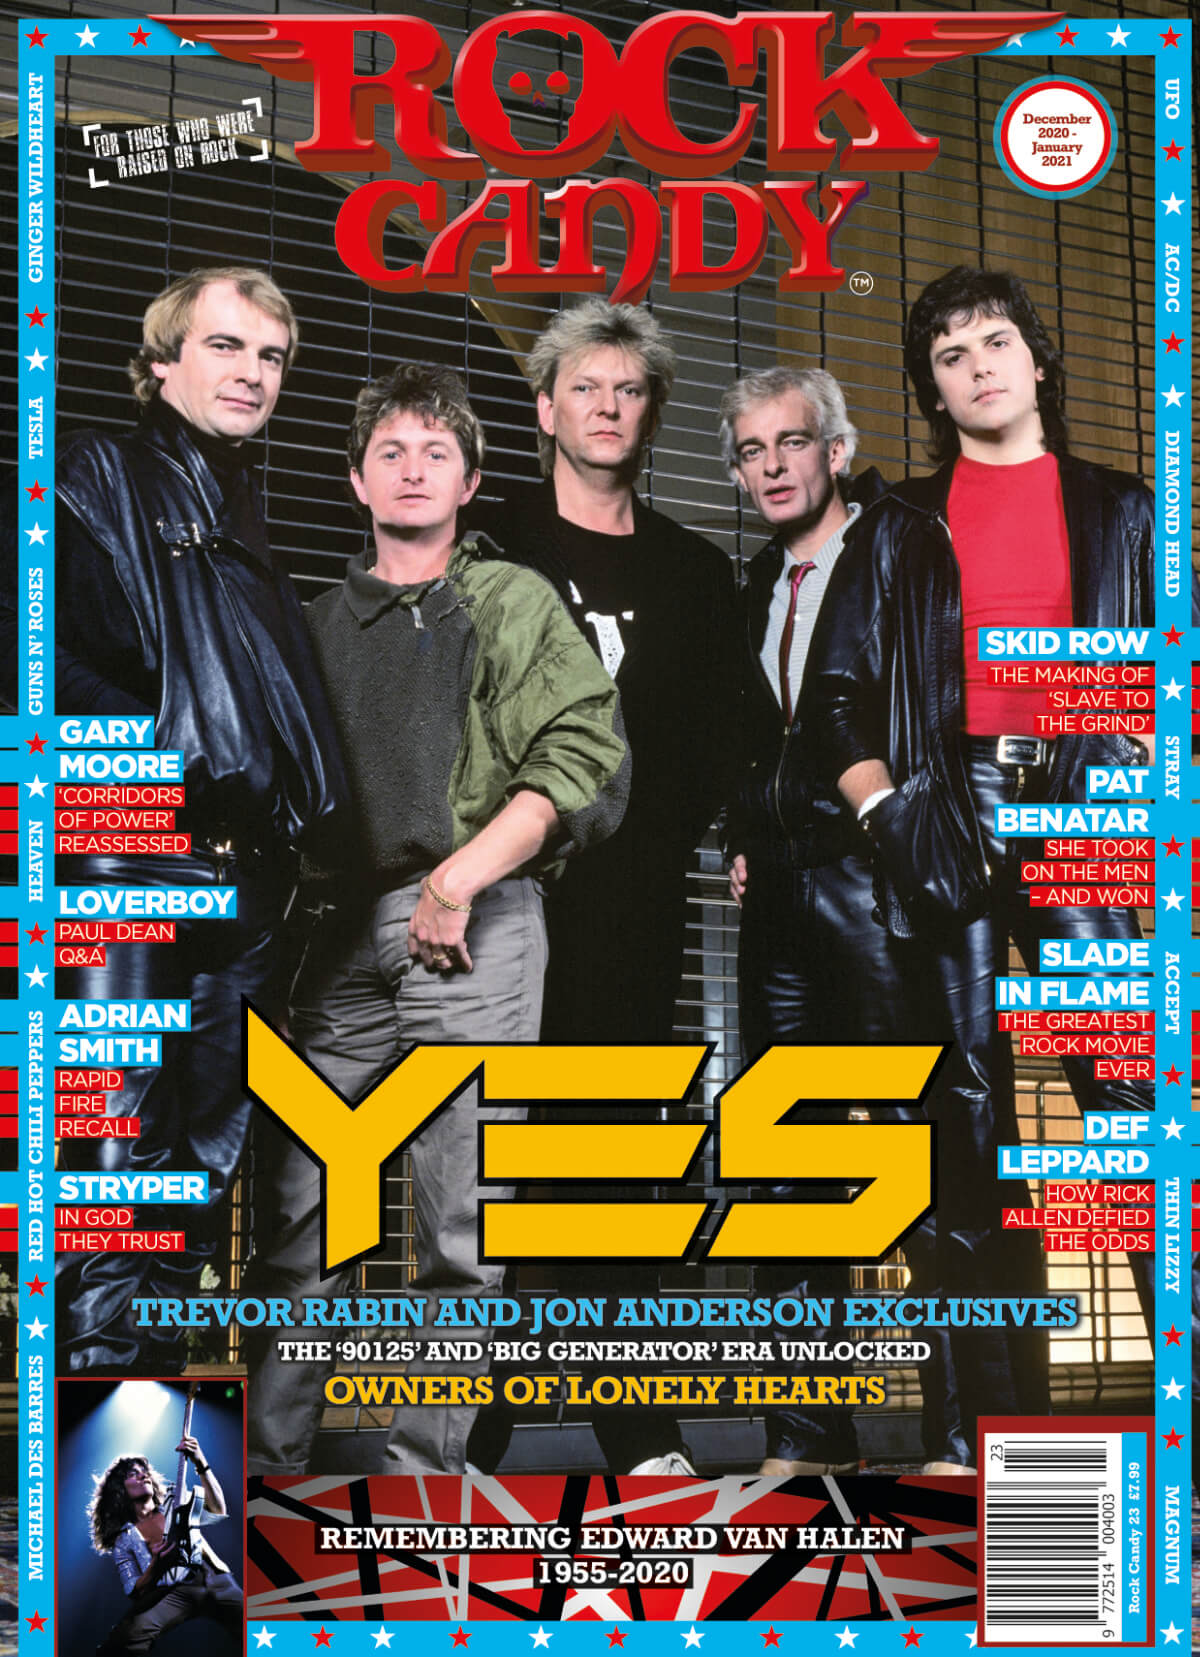 Issue 23 is available right now, featuring our cover story in-depth analysis of the classic Yes ‘90125’ and ‘Big Generator’ era.